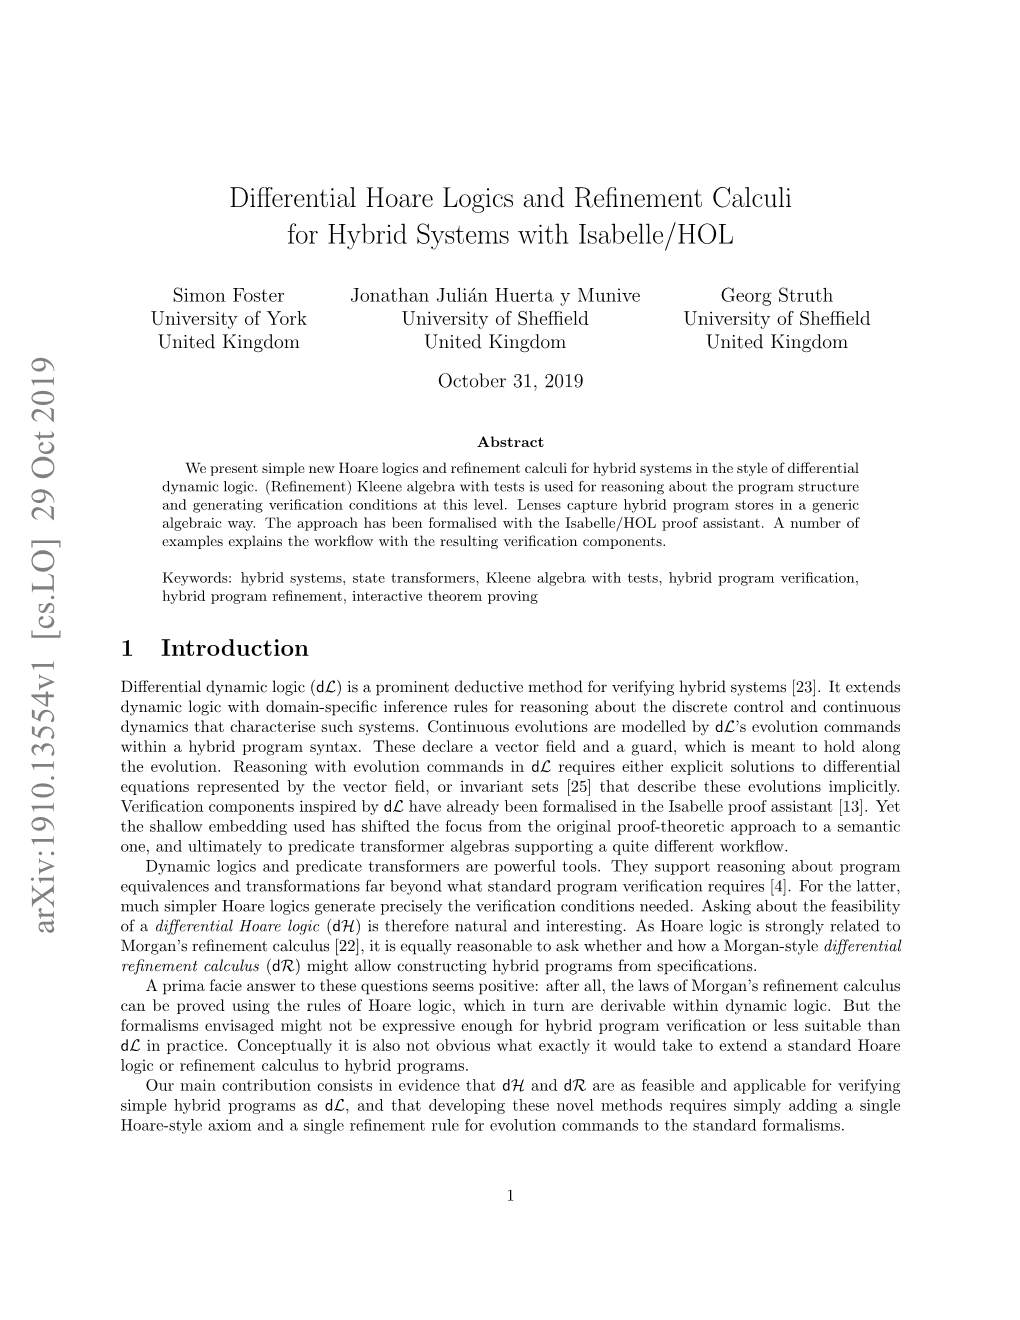 Differential Hoare Logics and Refinement Calculi for Hybrid